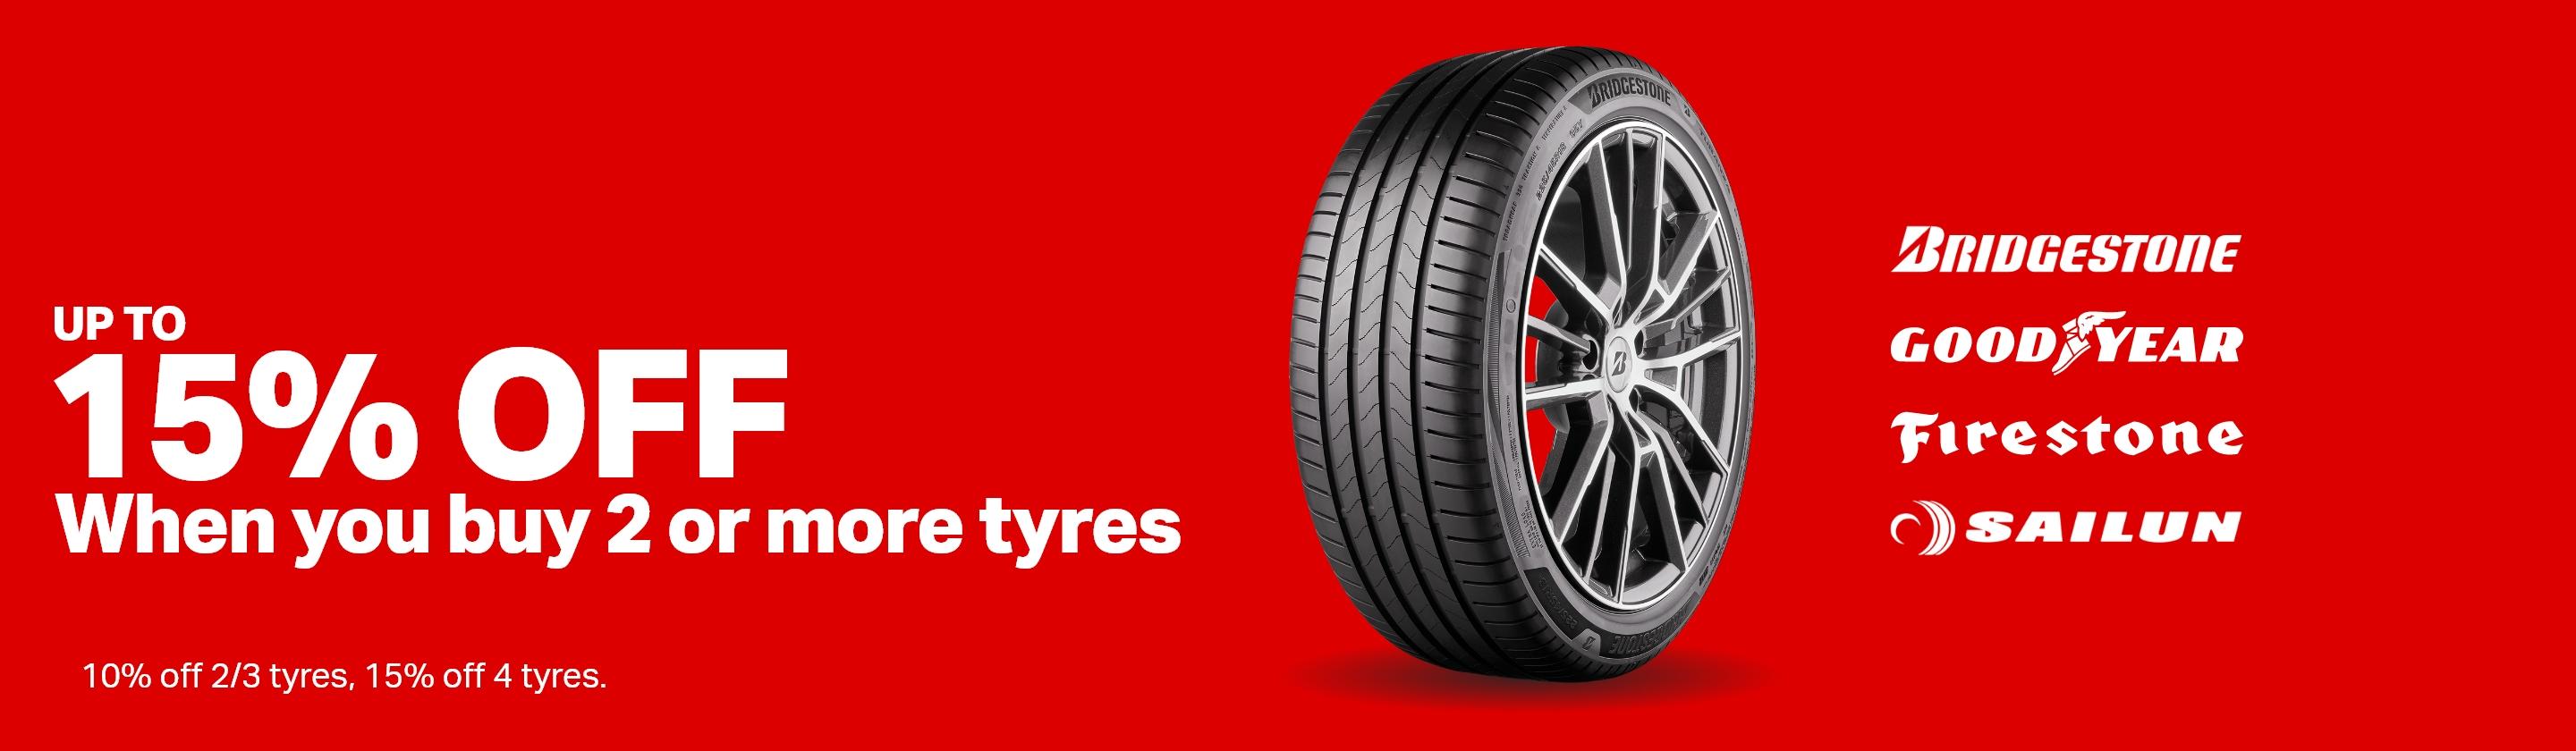 Up to 15% off 2 or more selected tyres*  
        *10% off 2/3 tyres, 15% off 4 tyres. T&Cs apply.  
        Bridgestone, Sailun, Goodyear, Firestone